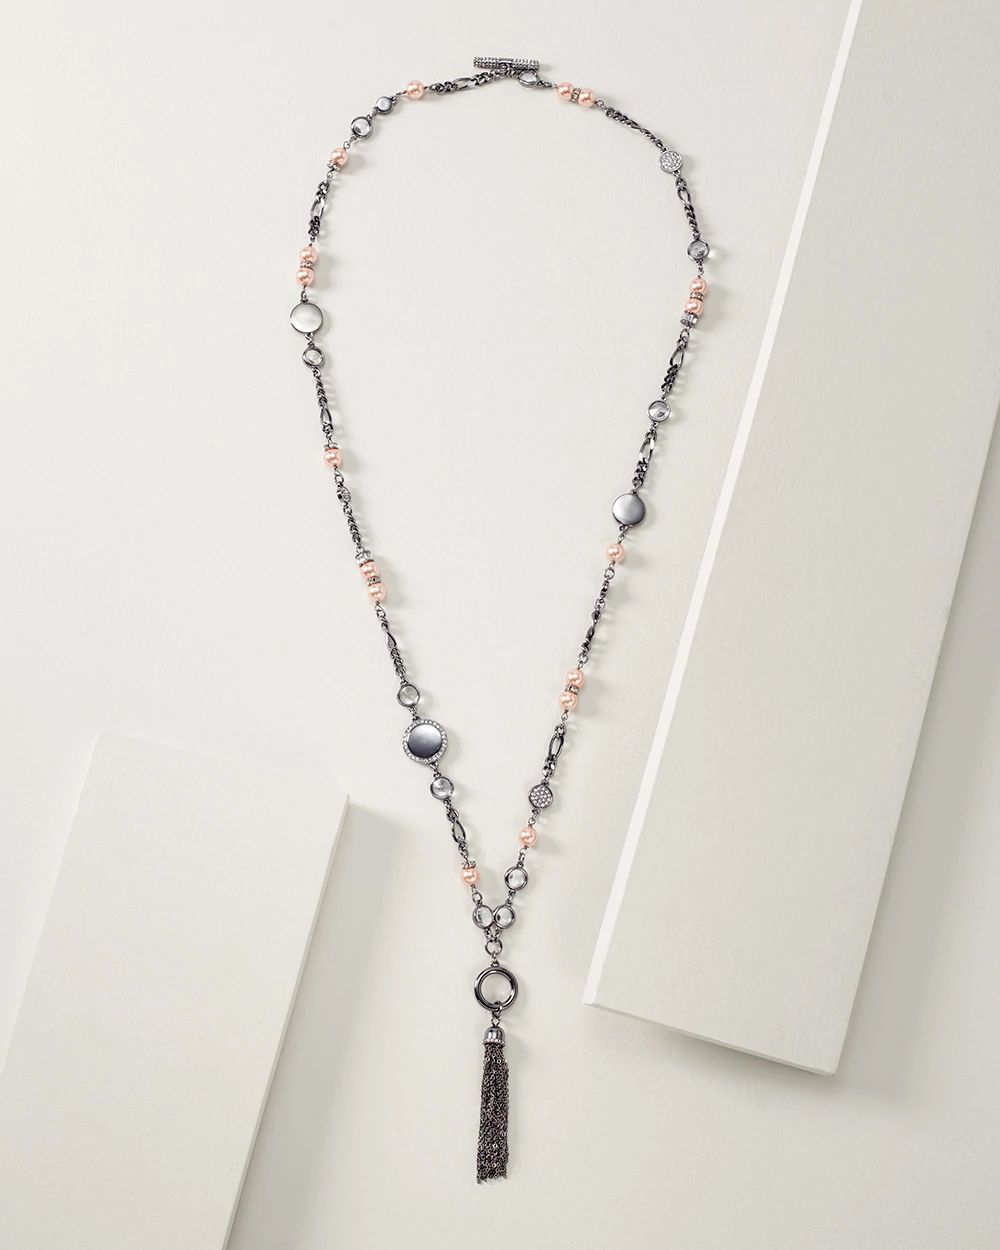 Hematite & Pink Pearl Convertible Tassel Necklace click to view larger image.